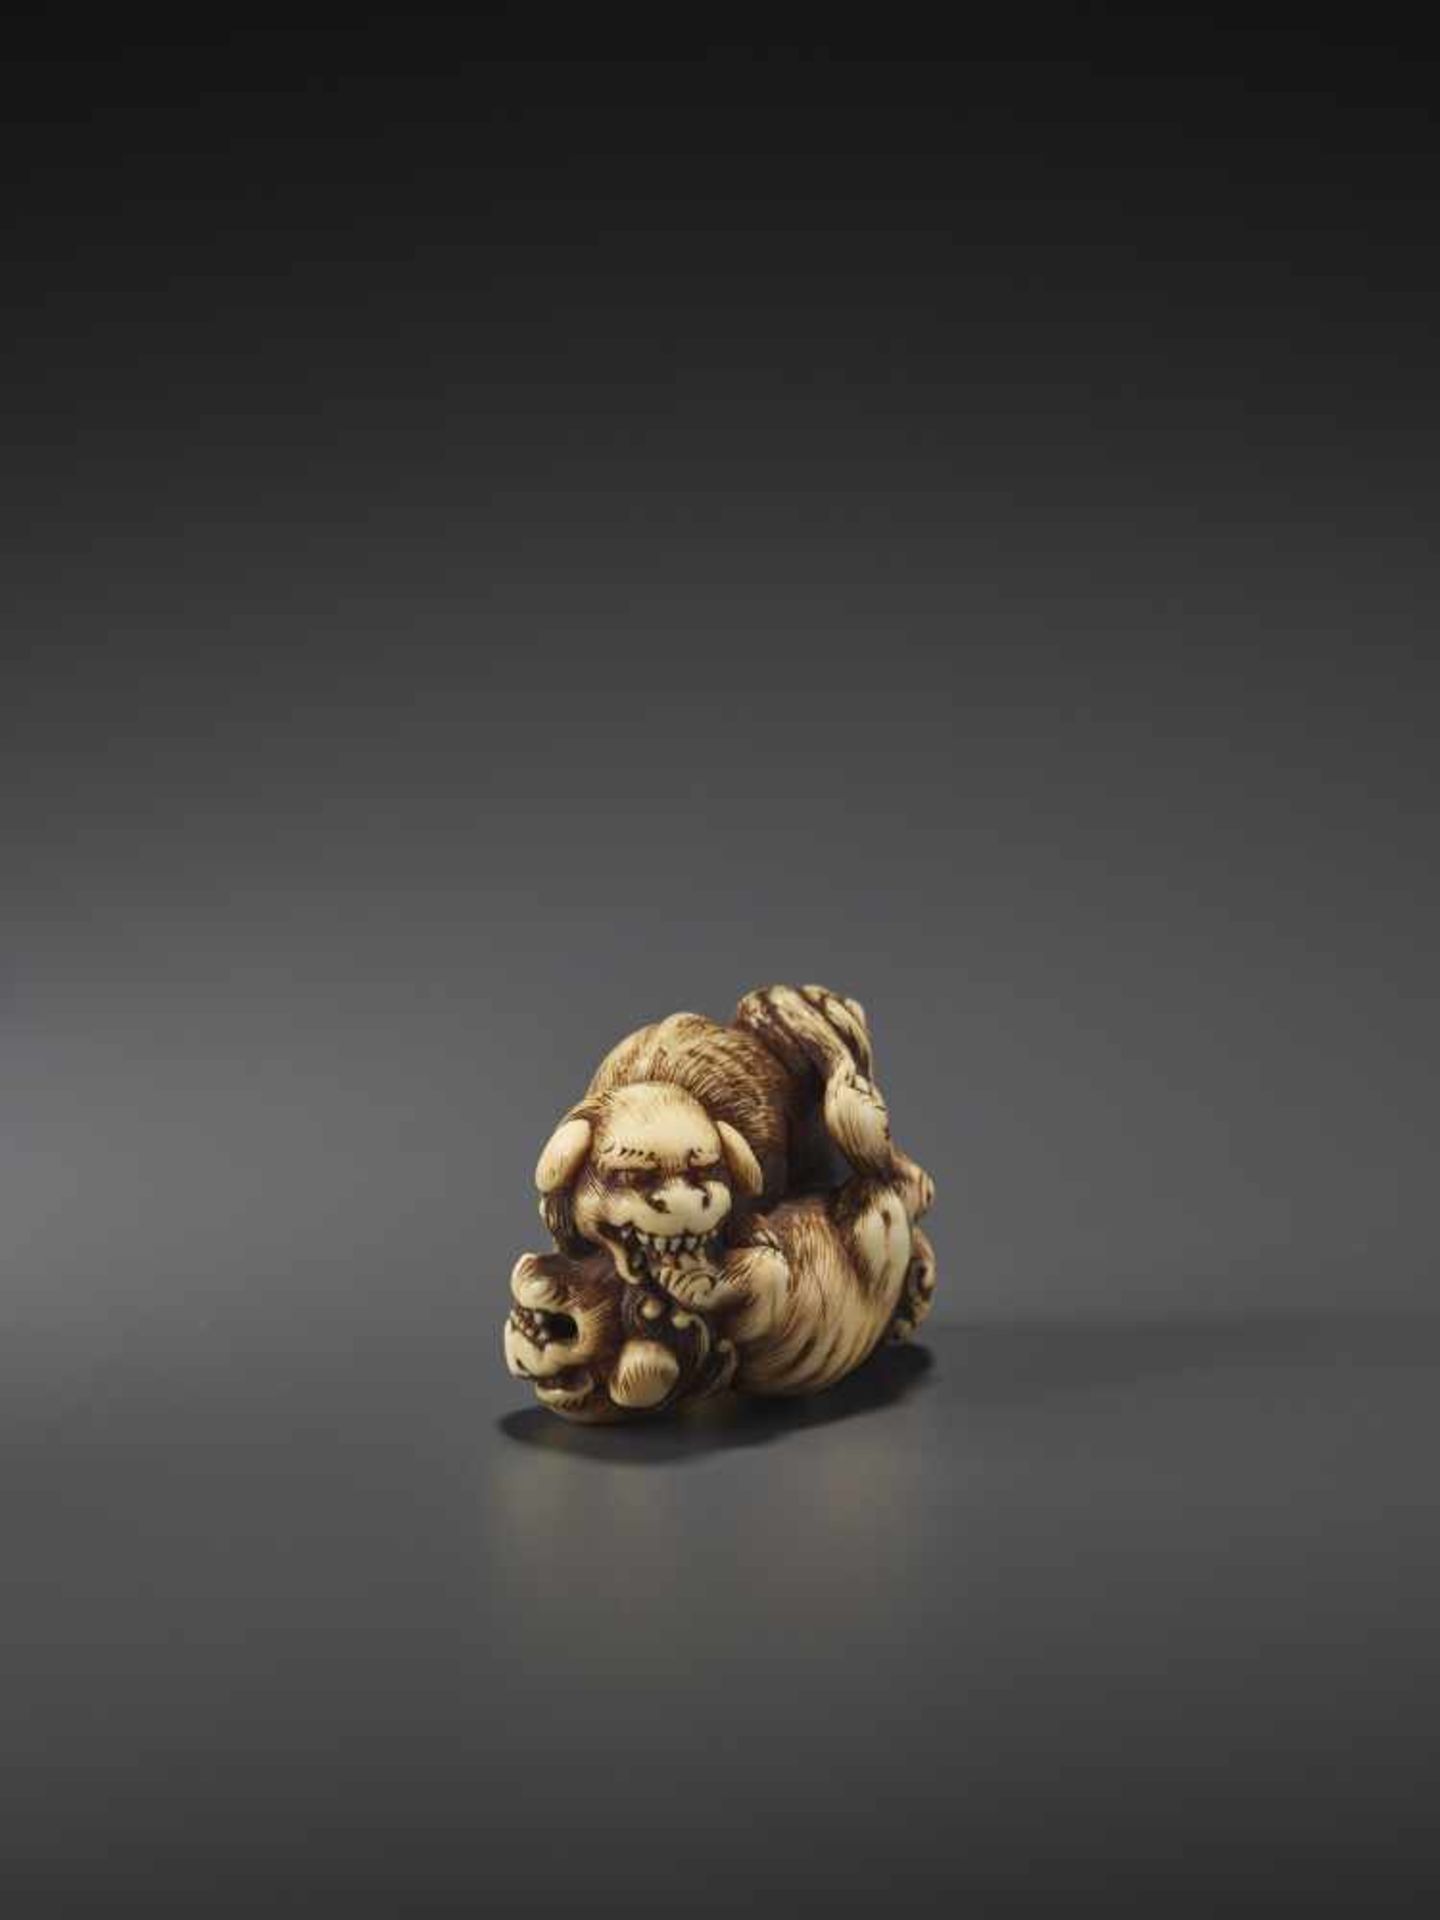 A FINE IVORY NETSUKE OF TWO FIGHTING SHISHI BY KINSHI By Kinshi, ivory netsukeJapan, 19th century, - Image 8 of 10